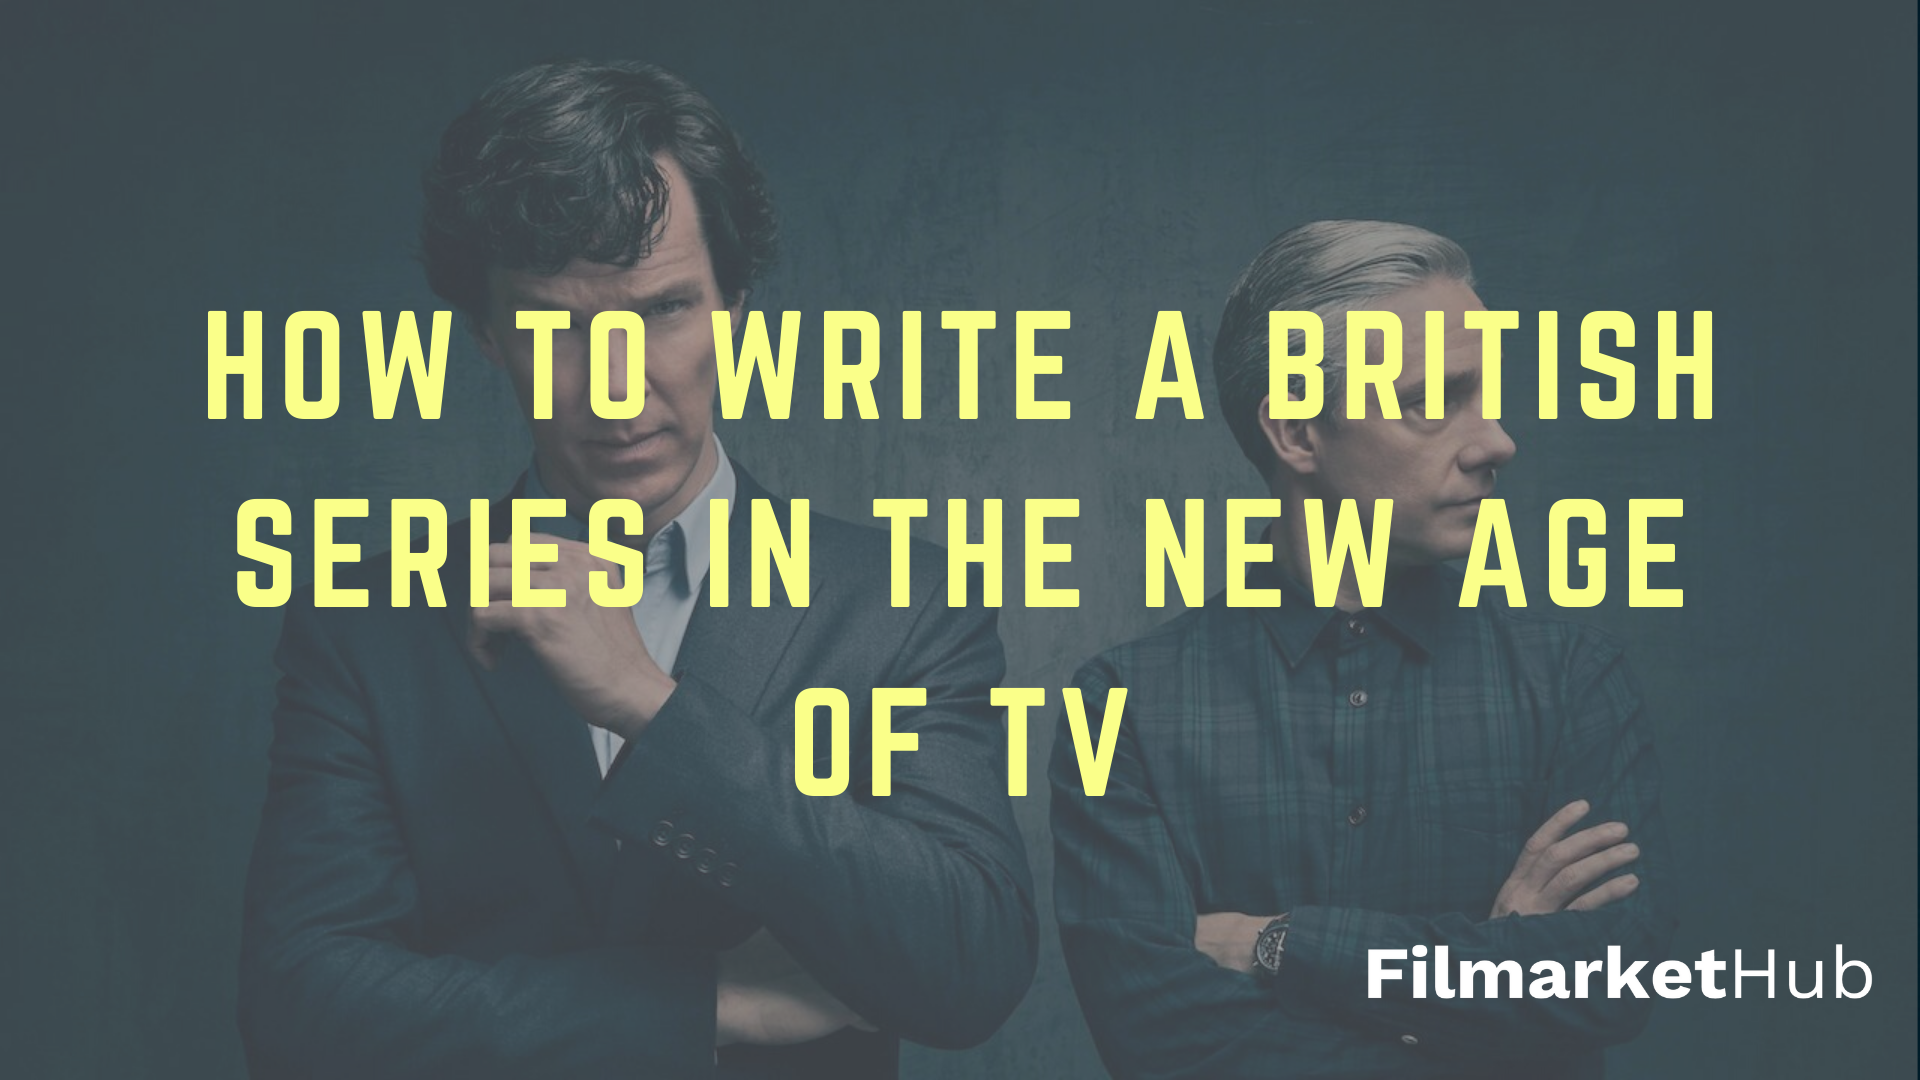 HOW TO WRITE A BRITISH SERIES IN THE NEW AGE OF TV  by Filmarket